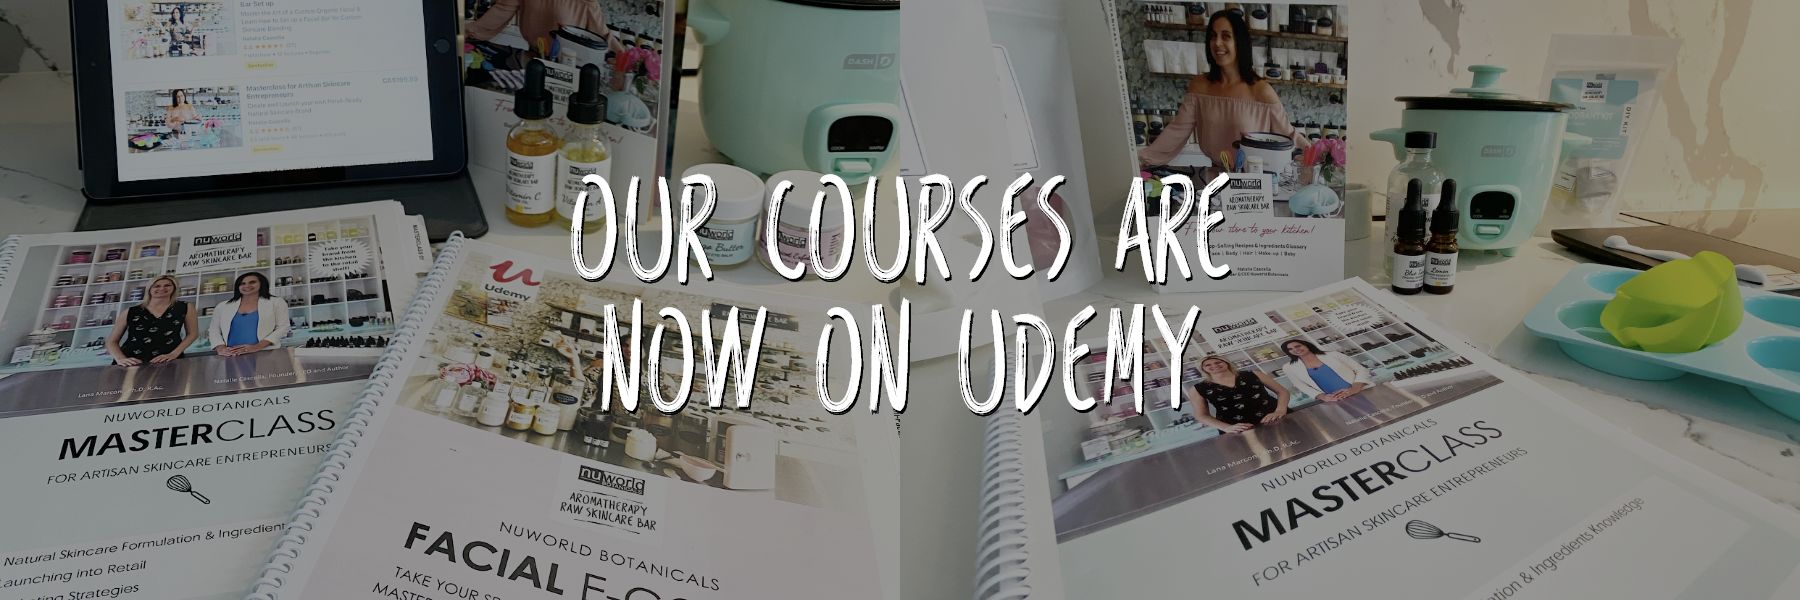 Our courses are now on Udemy